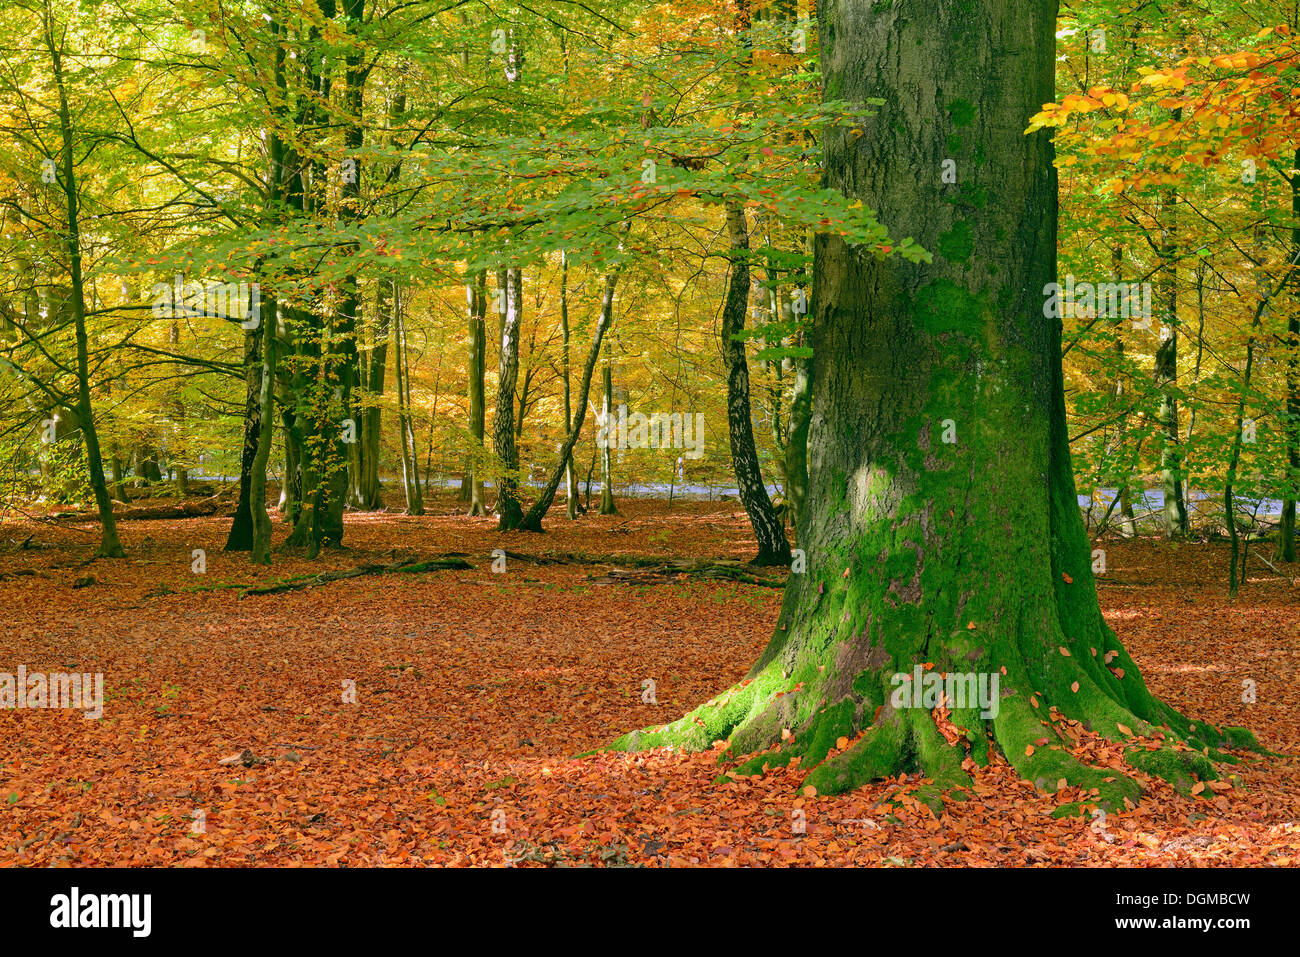 Mossy trunks of old Beech (Fagus) trees in autumn, nature reserve of the ancient forest of Sababurg, Hesse Stock Photo